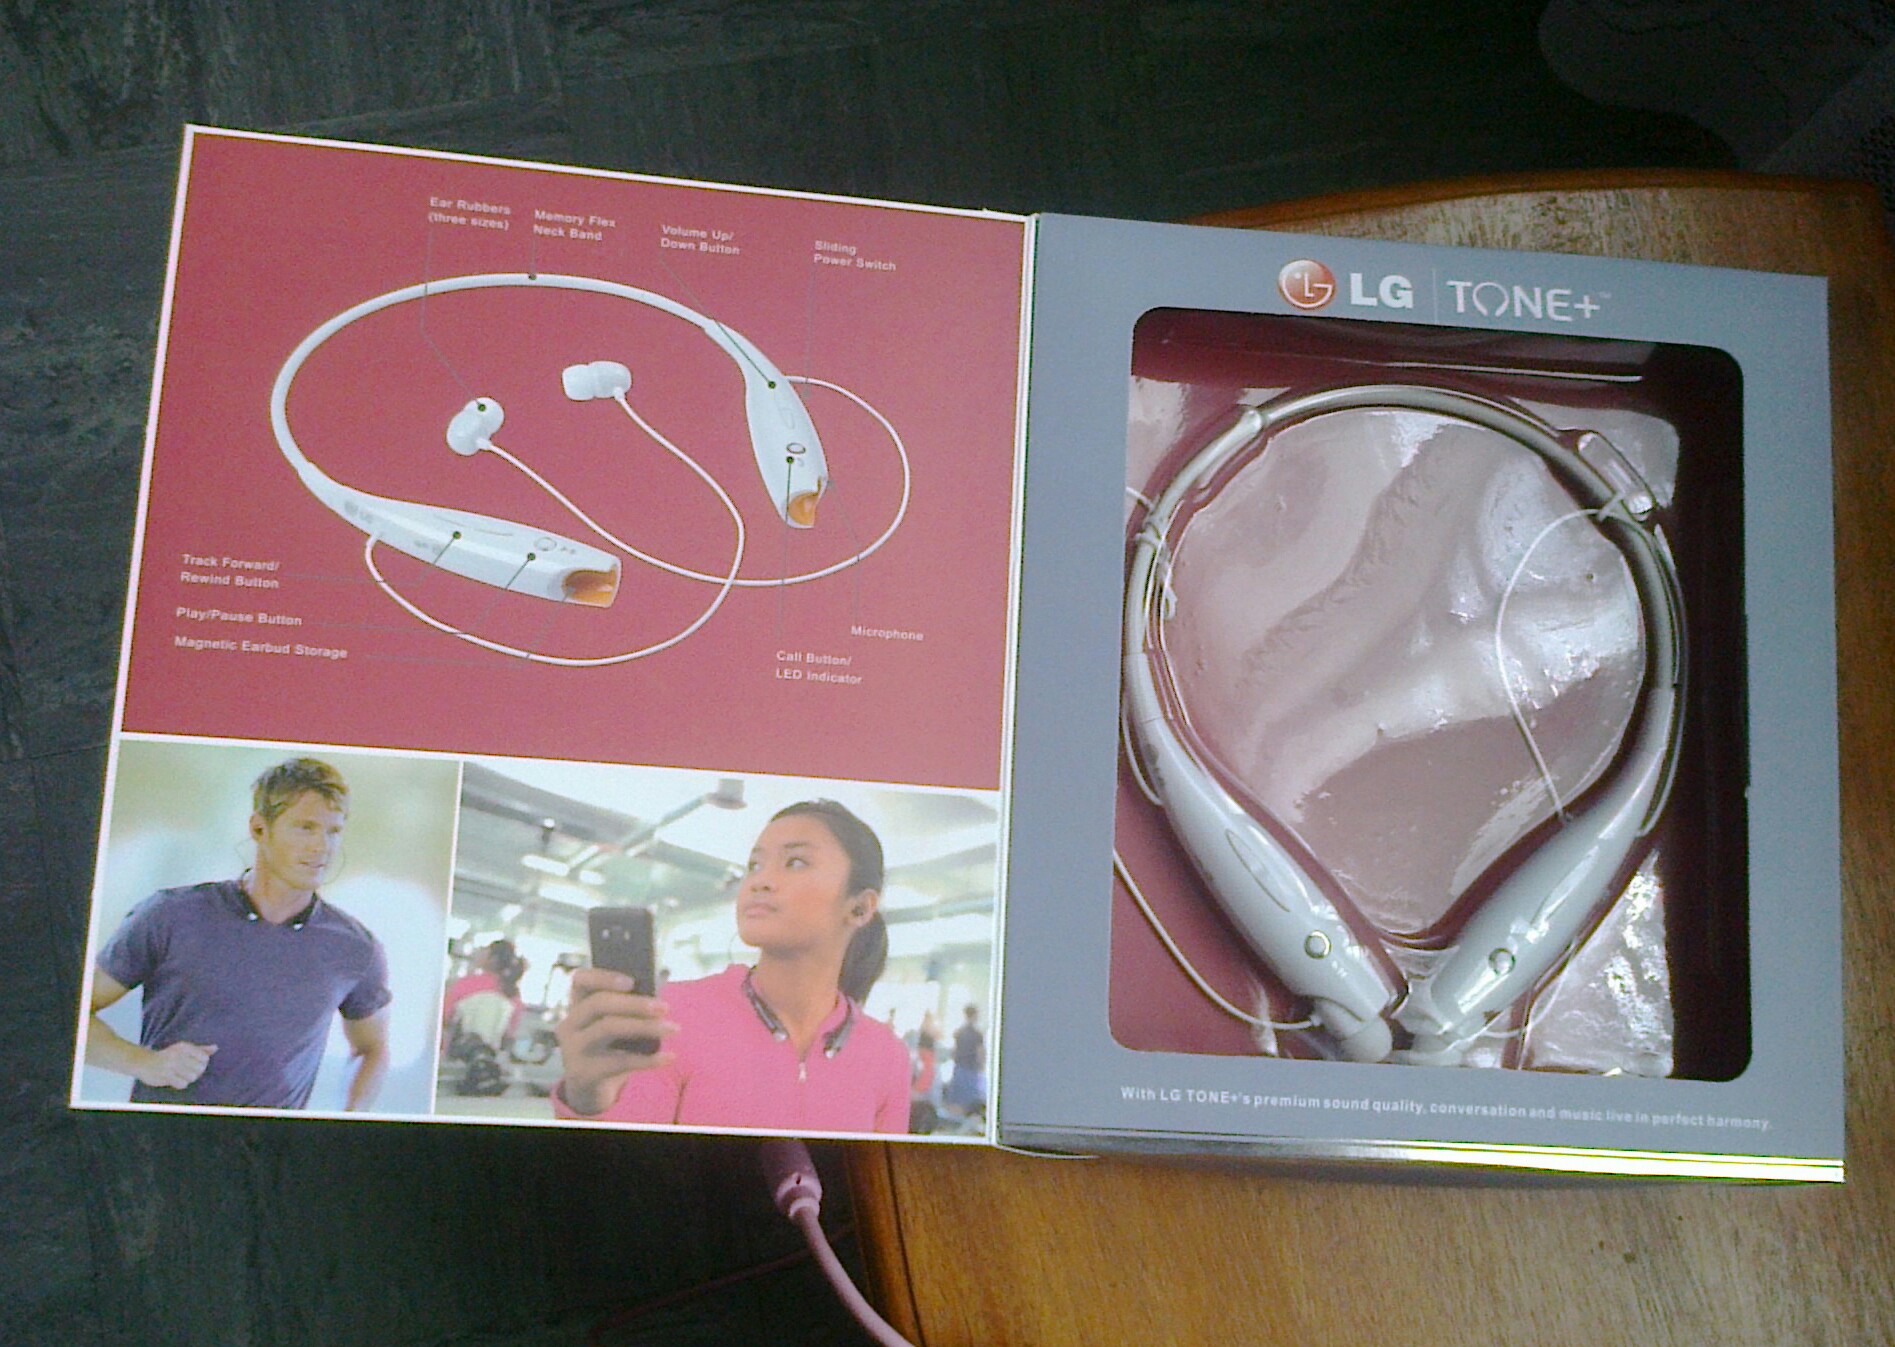 LG Tone + Bluetooth Headset, with Incoming Call notification and Media Streaming